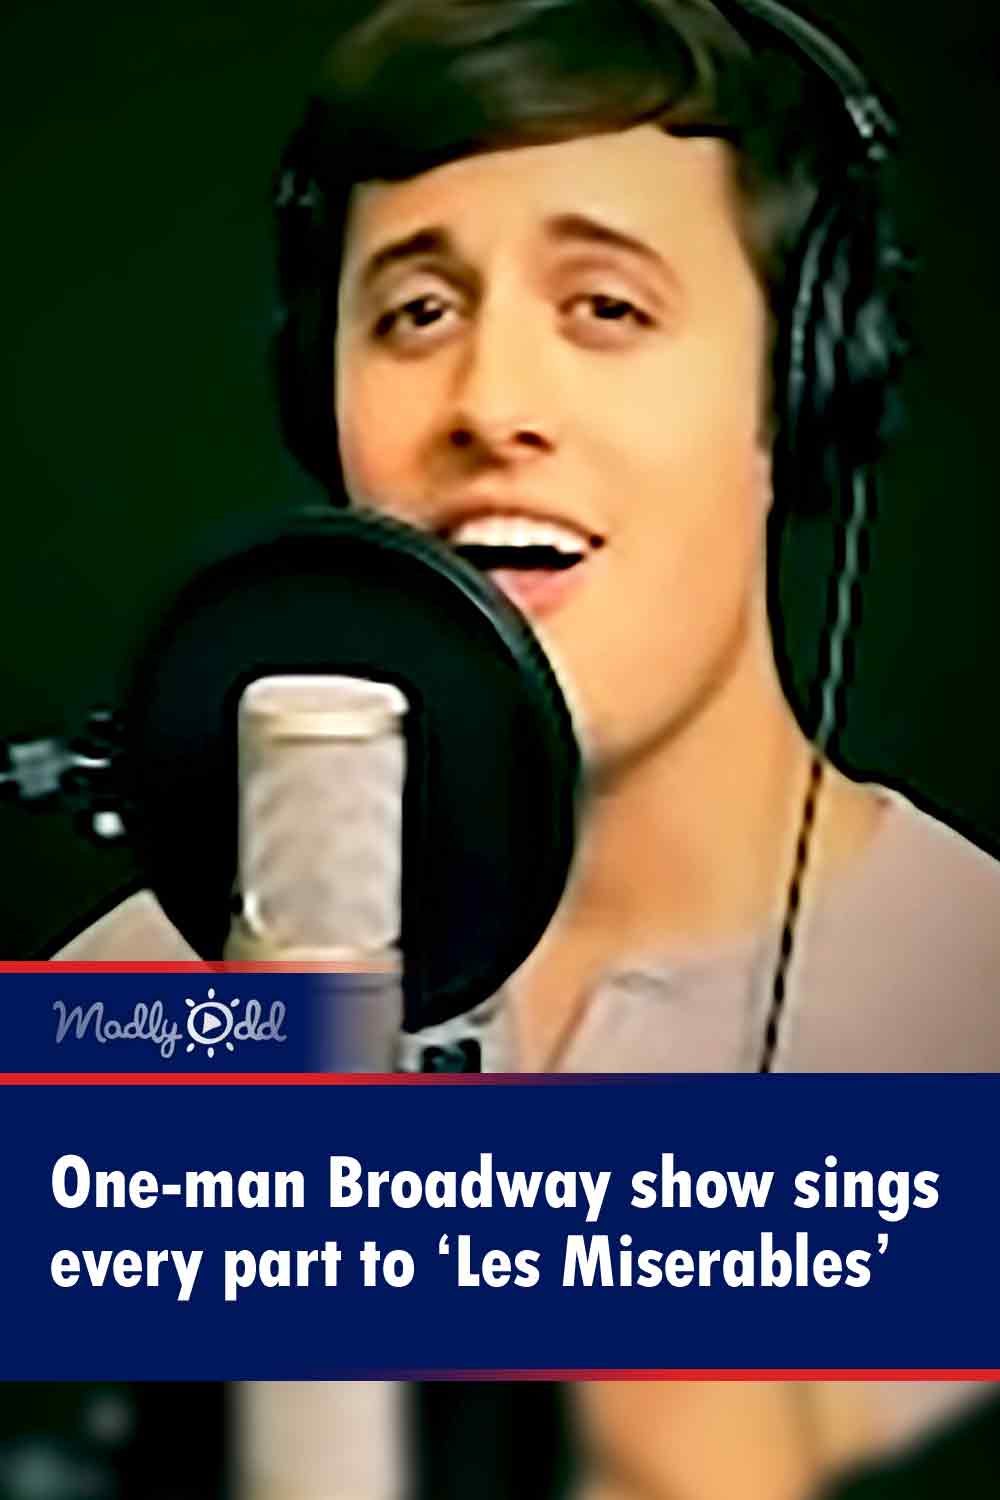 One-man Broadway show sings every part to ‘Les Miserables’